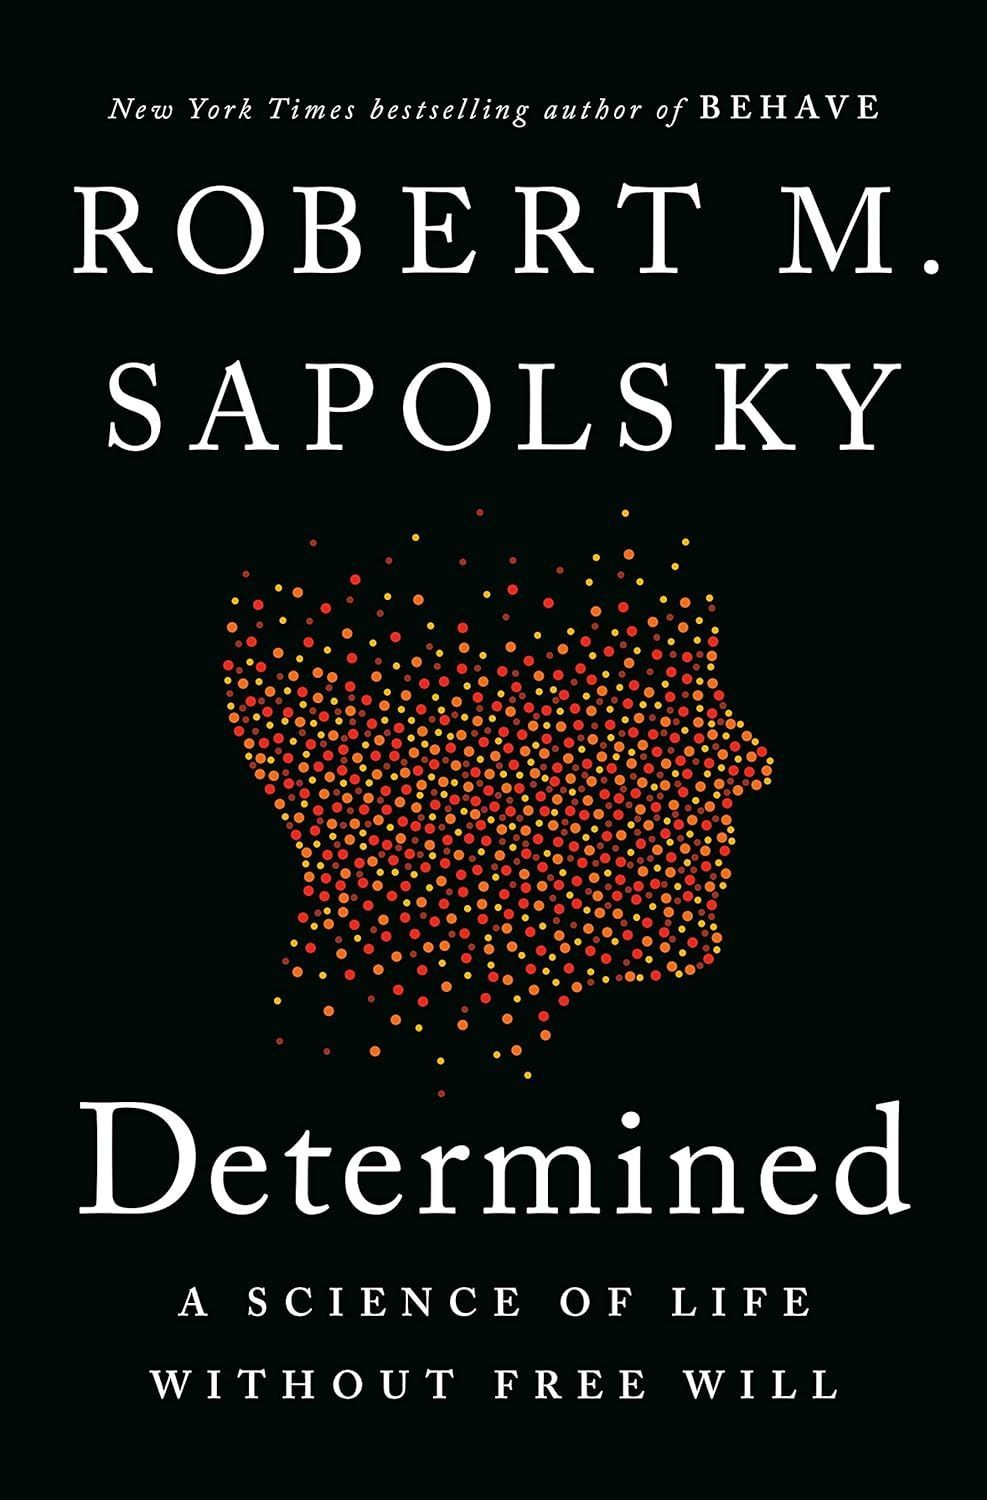 Everything Is Embedded in What Came Before: A Conversation with Robert M. Sapolsky